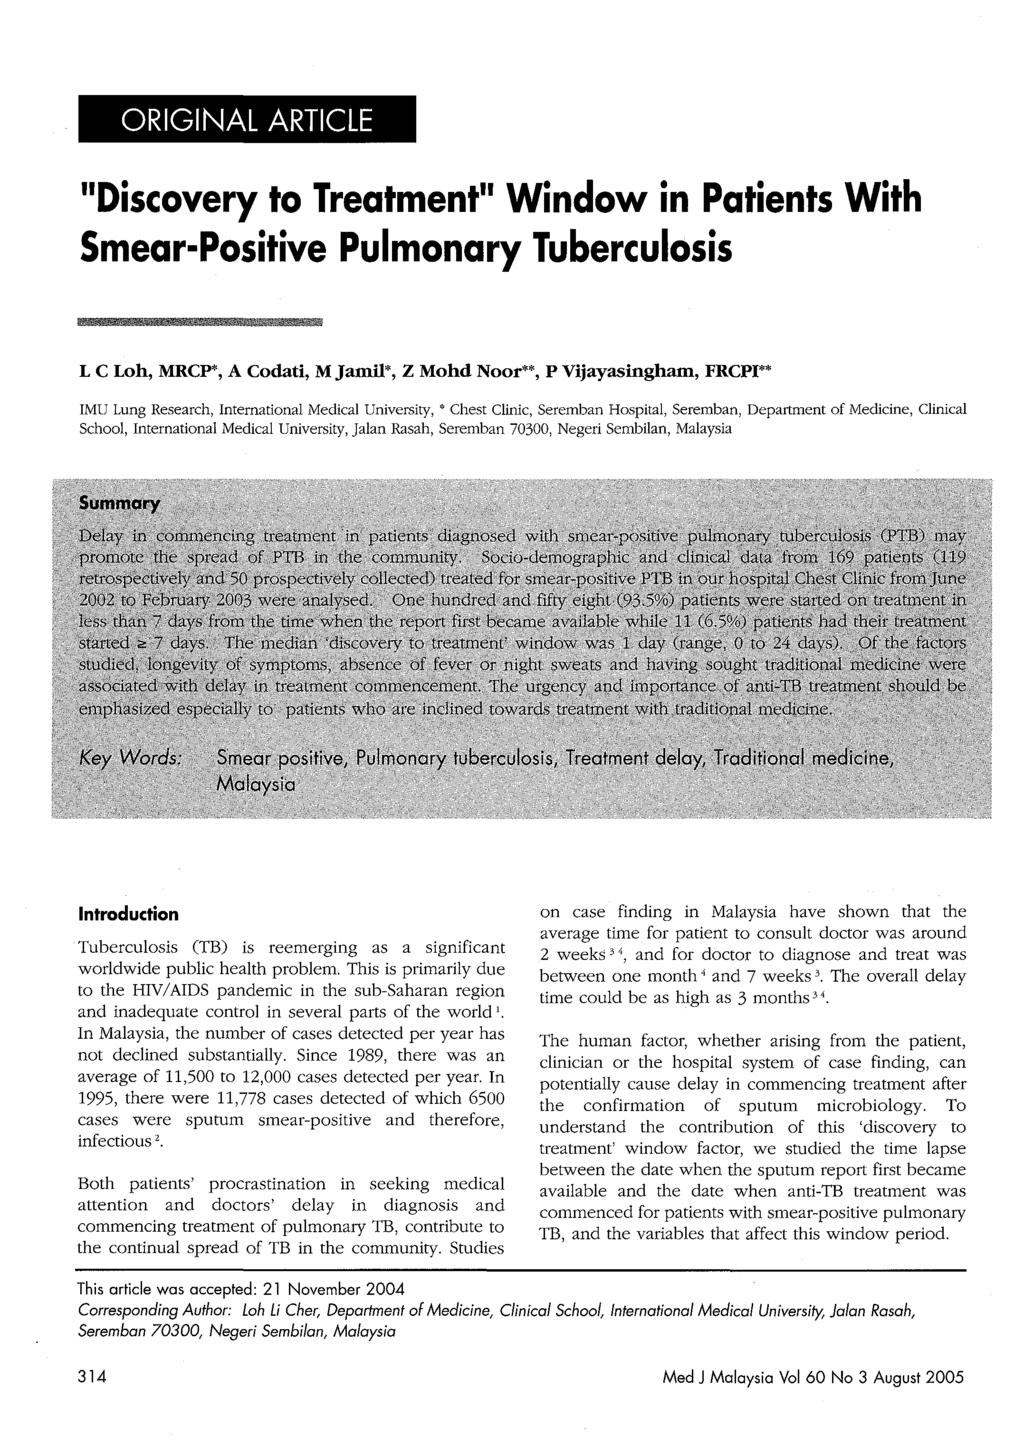 ORIGINAL ARTICLE "Discovery to Treatment" Window in Patients With Smear-Positive Pulmonary Tuberculosis L C Loh, MRCP*, A Codati, MJamil*, Z Mohd Noor**, P Vijayasingham, FRCPI** IMU Lung Research,